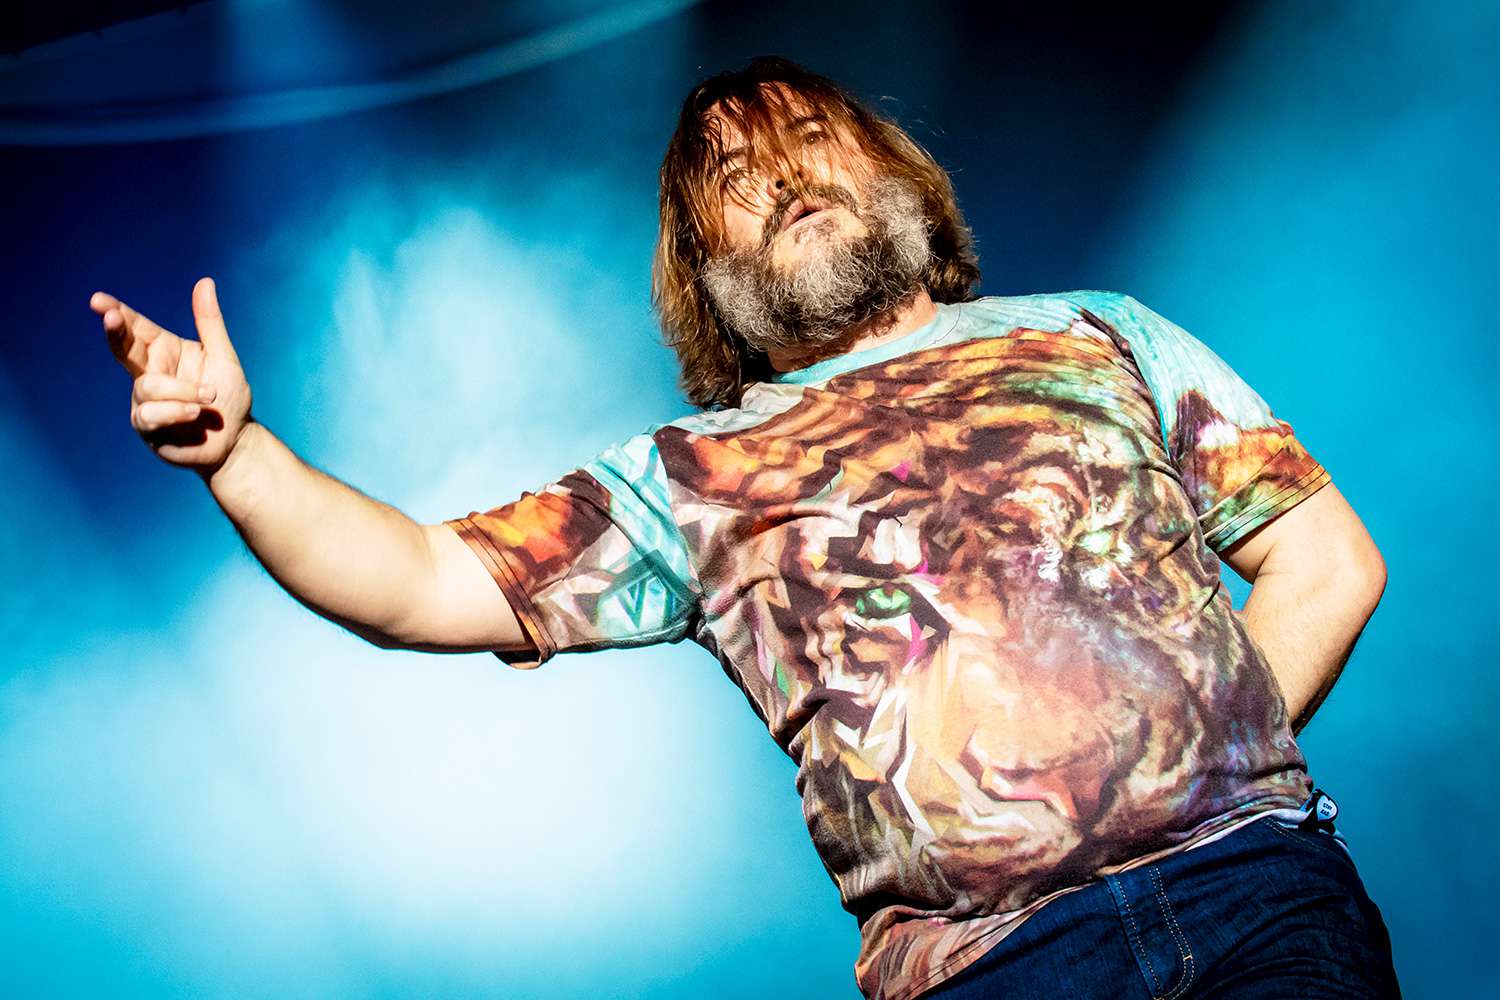 Jack Black of Tenacious D performs on February 19, 2020 in Milan, Italy